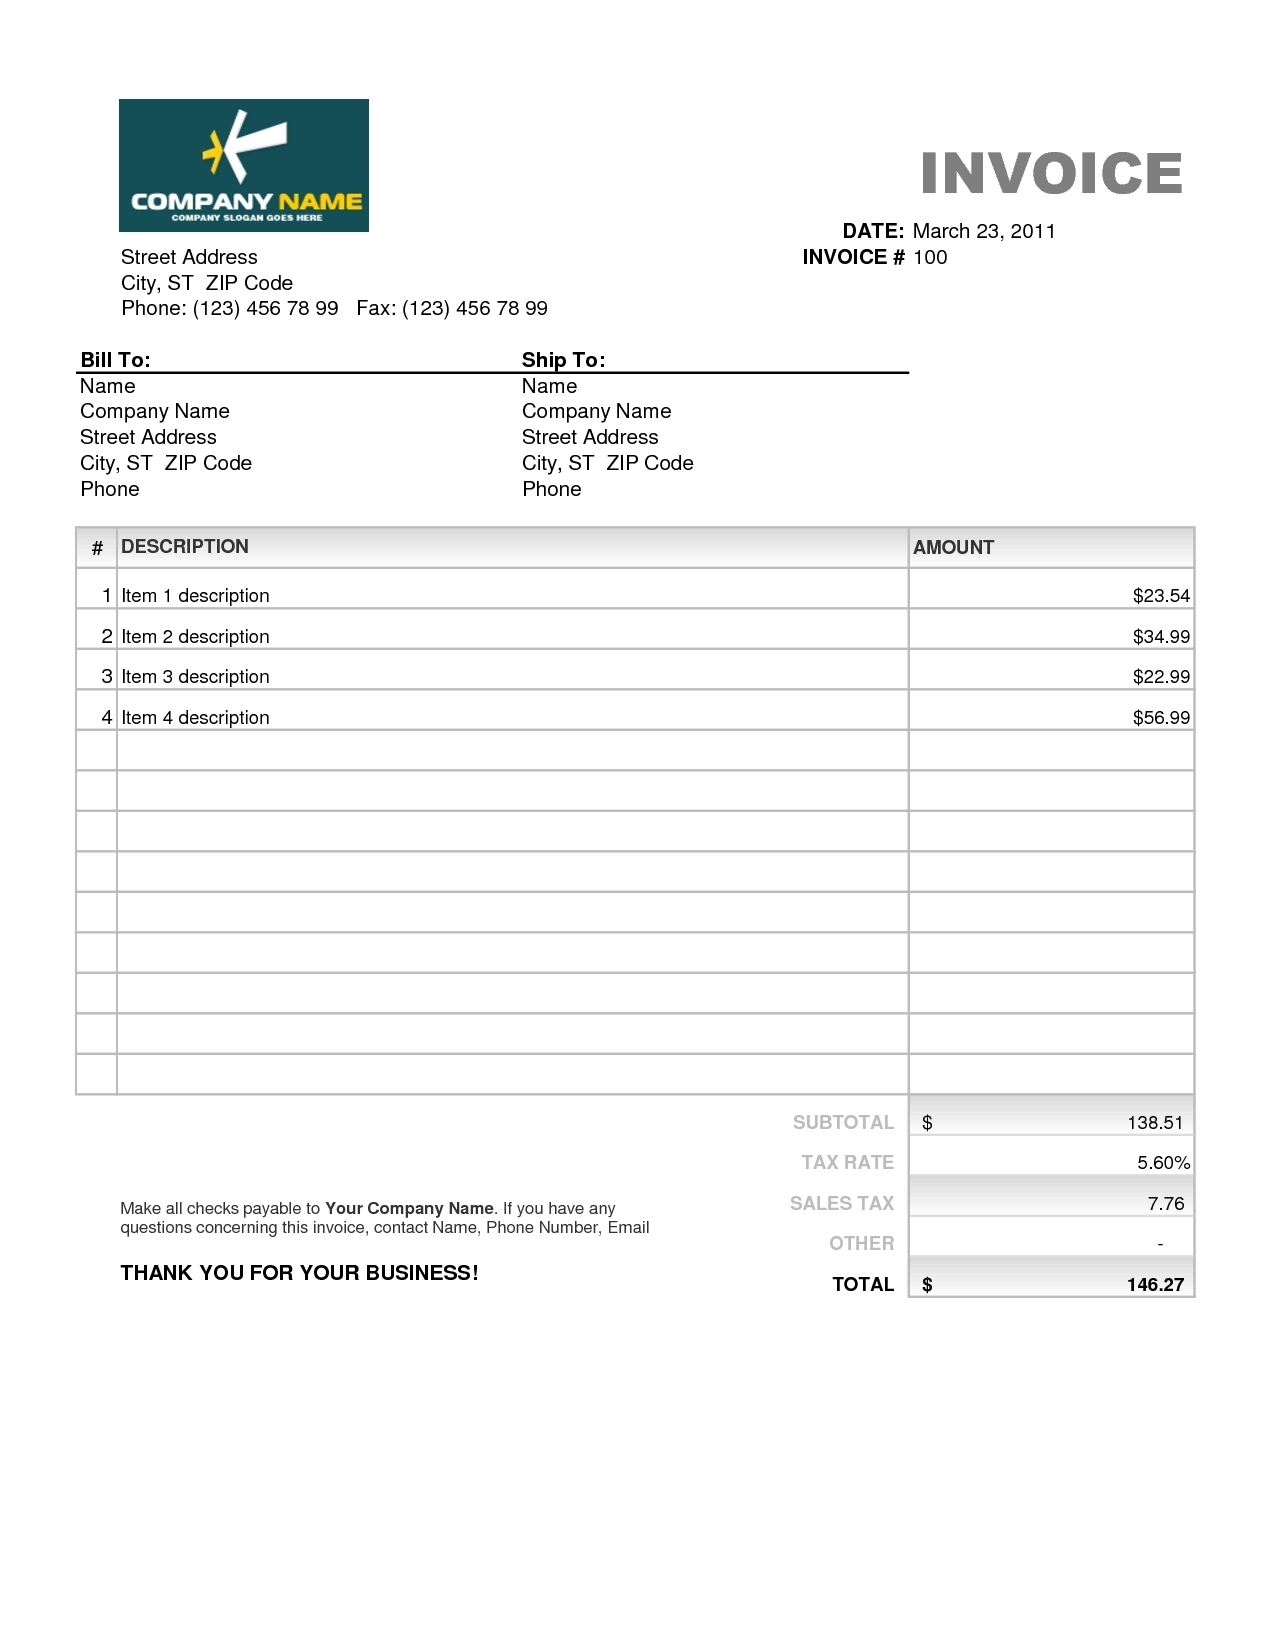 invoice excel template free download invoice template free 2016 free download invoice